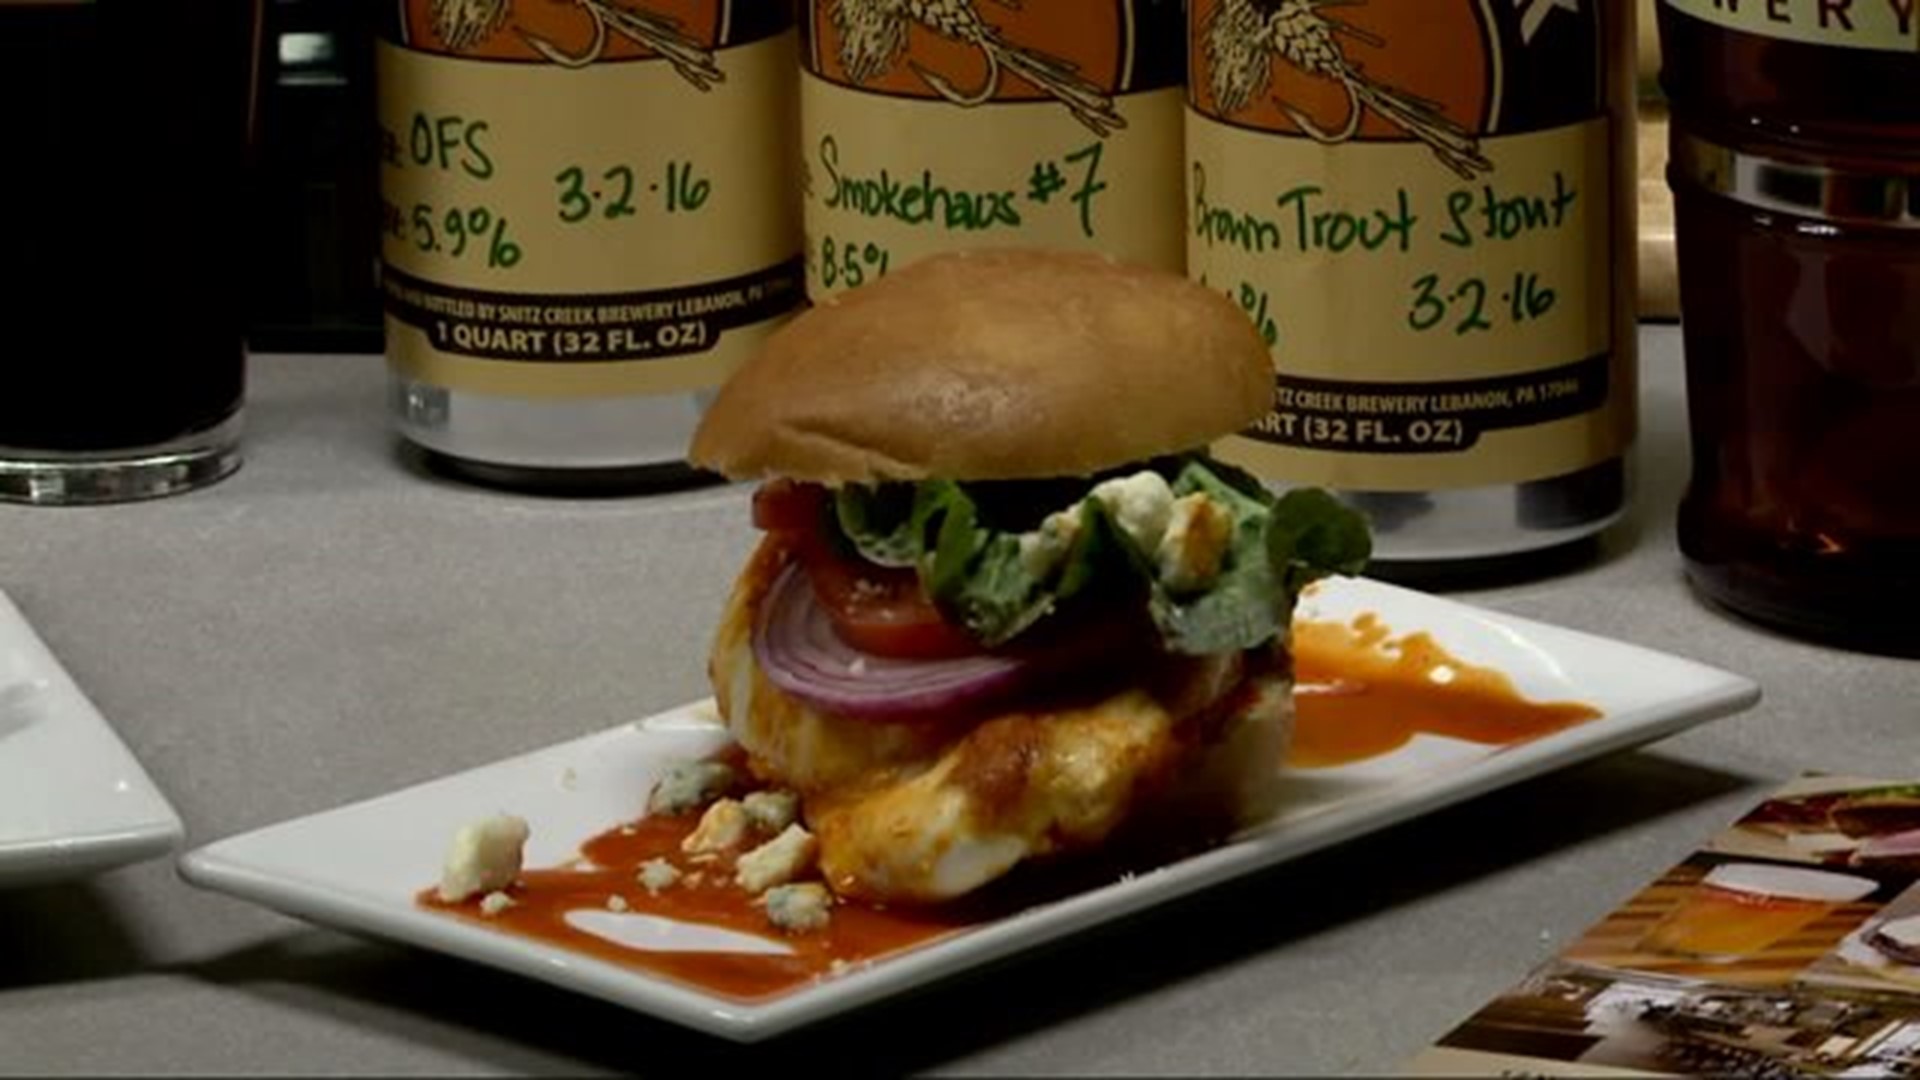 Snitz Creek Brewery brings delicious dishes to the morning show